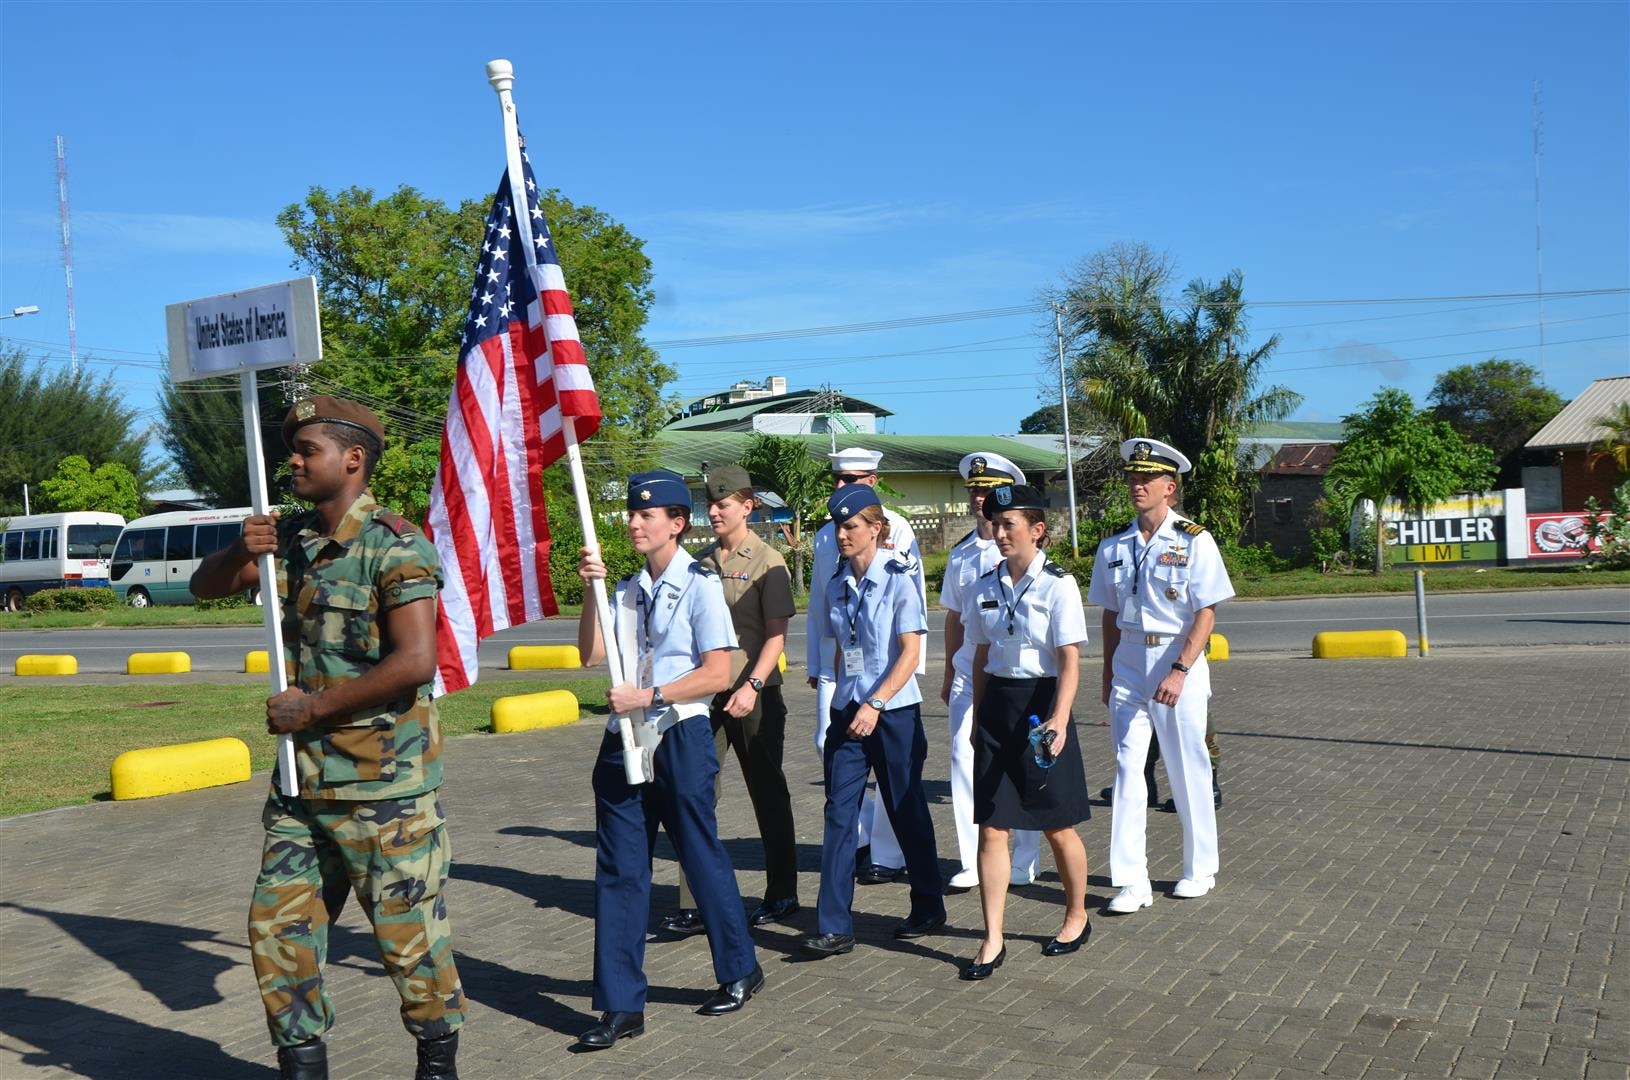 Maj Elissa Ballas carries the flag as Team USA marches in for the opening ceremony of the 2013 CISM World Military Marathon Championship in Paramaribo, Suriname on 19-24 November.